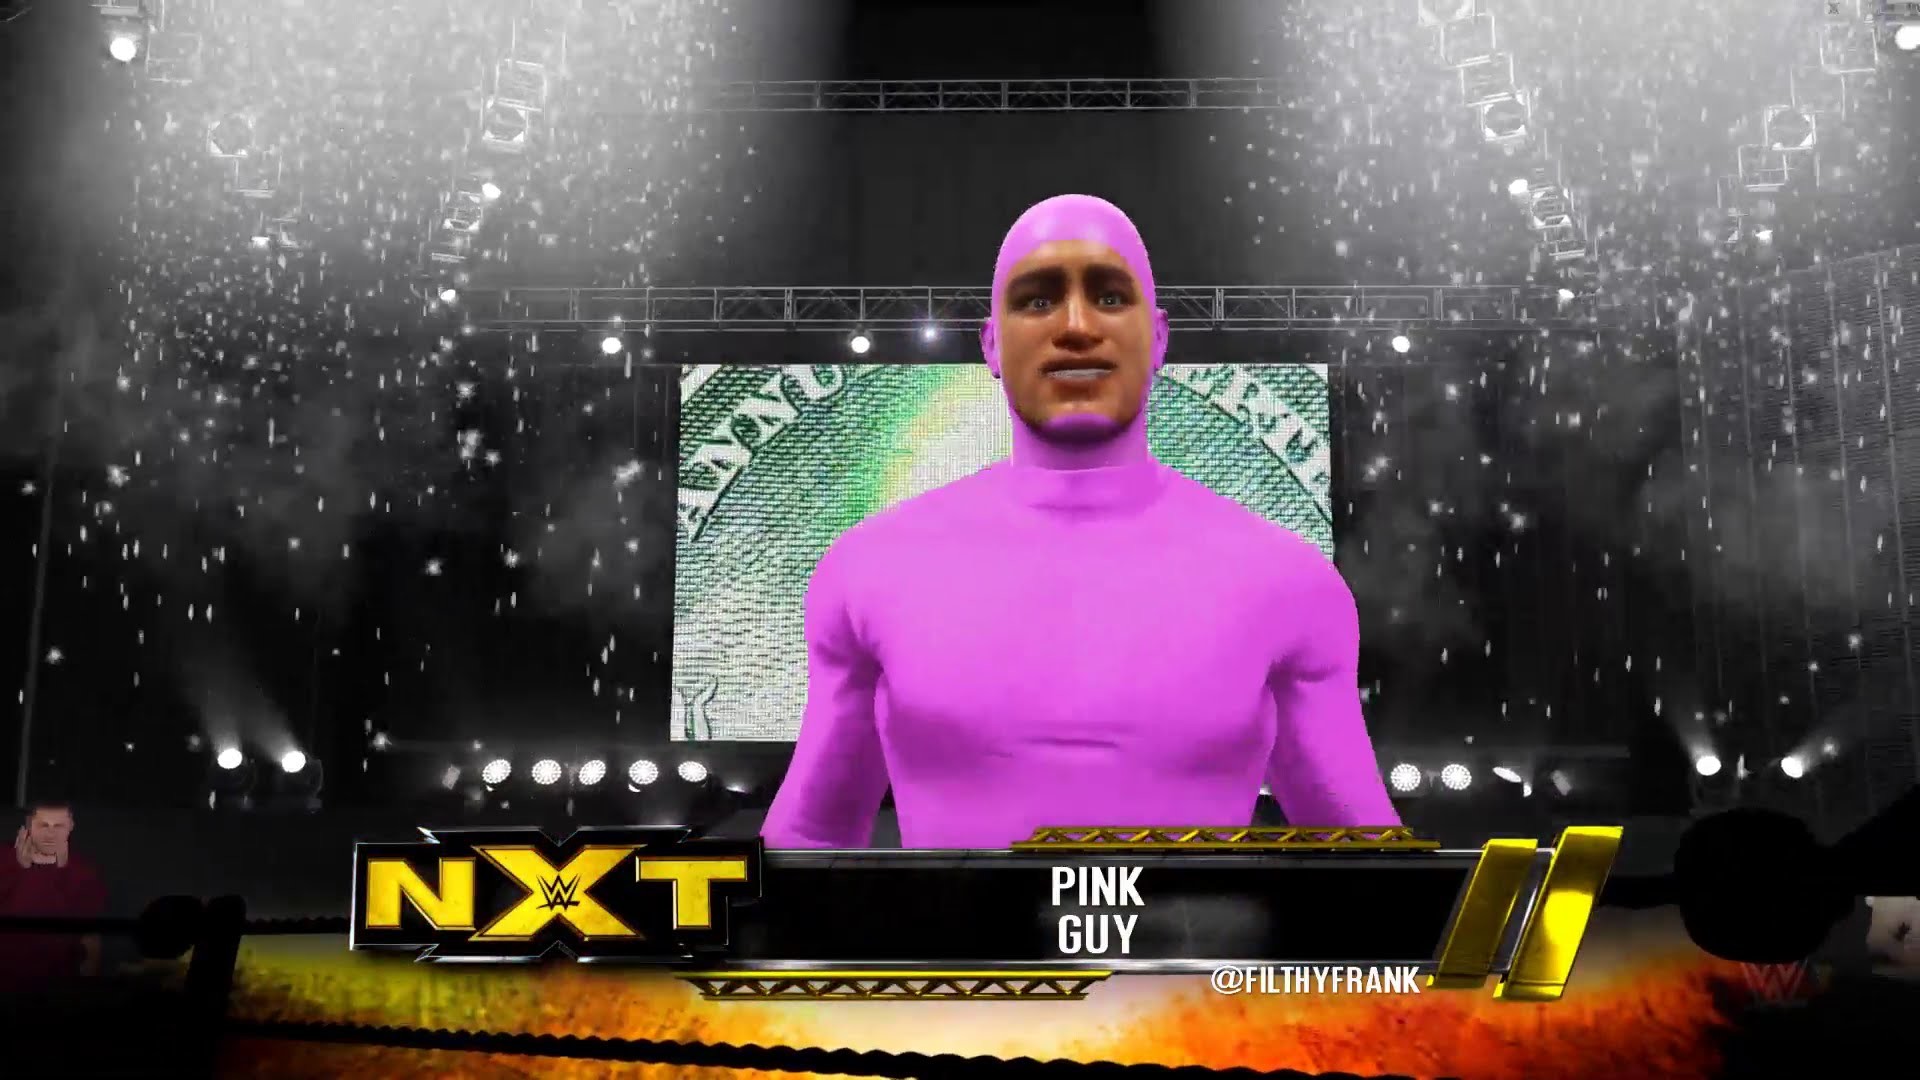 1920x1080 PINK GUY MAKES HIS WWE DEBUT, NXT IS THE FILTHY FRANK SHOW (WWE 2k16)